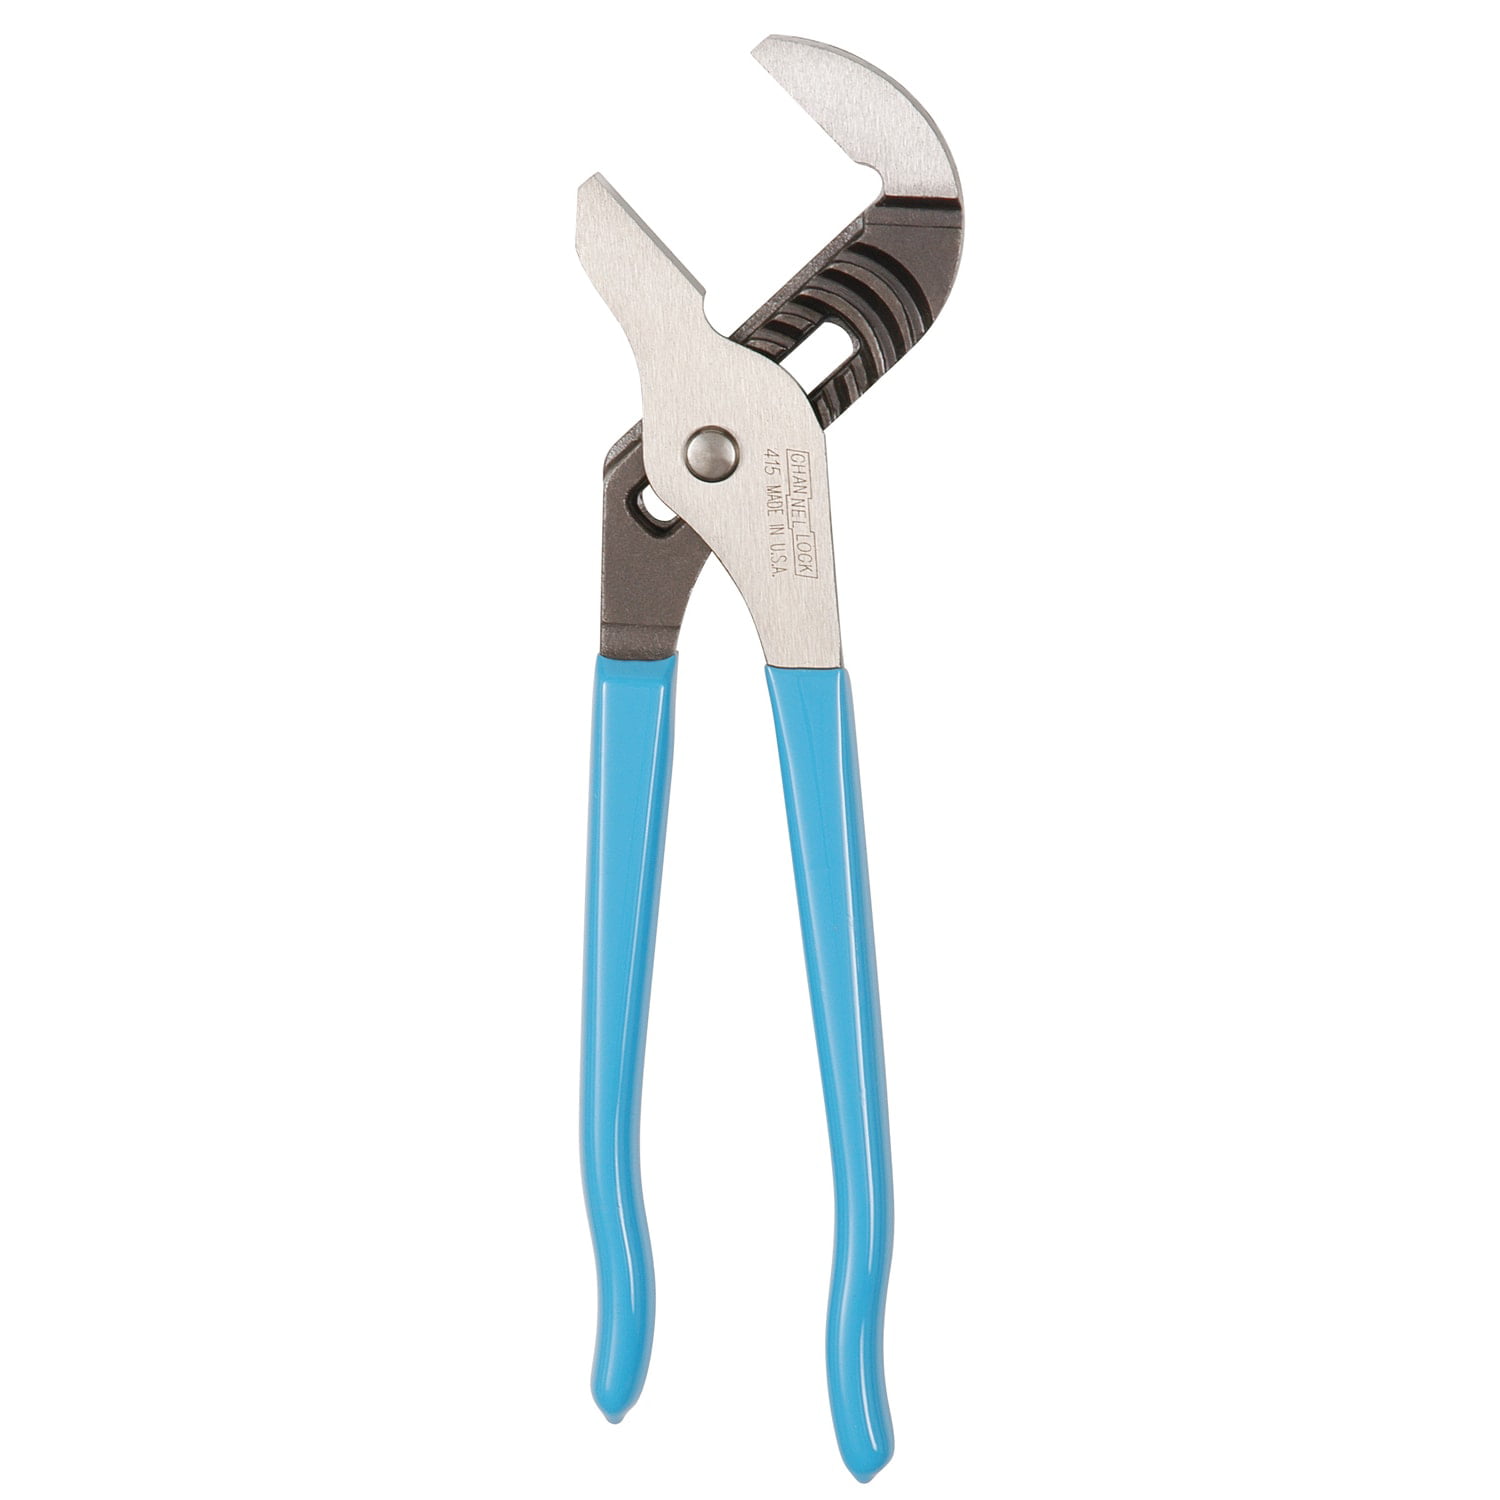 Channellock 422 Tongue & Groove Pliers Five Adjustments 